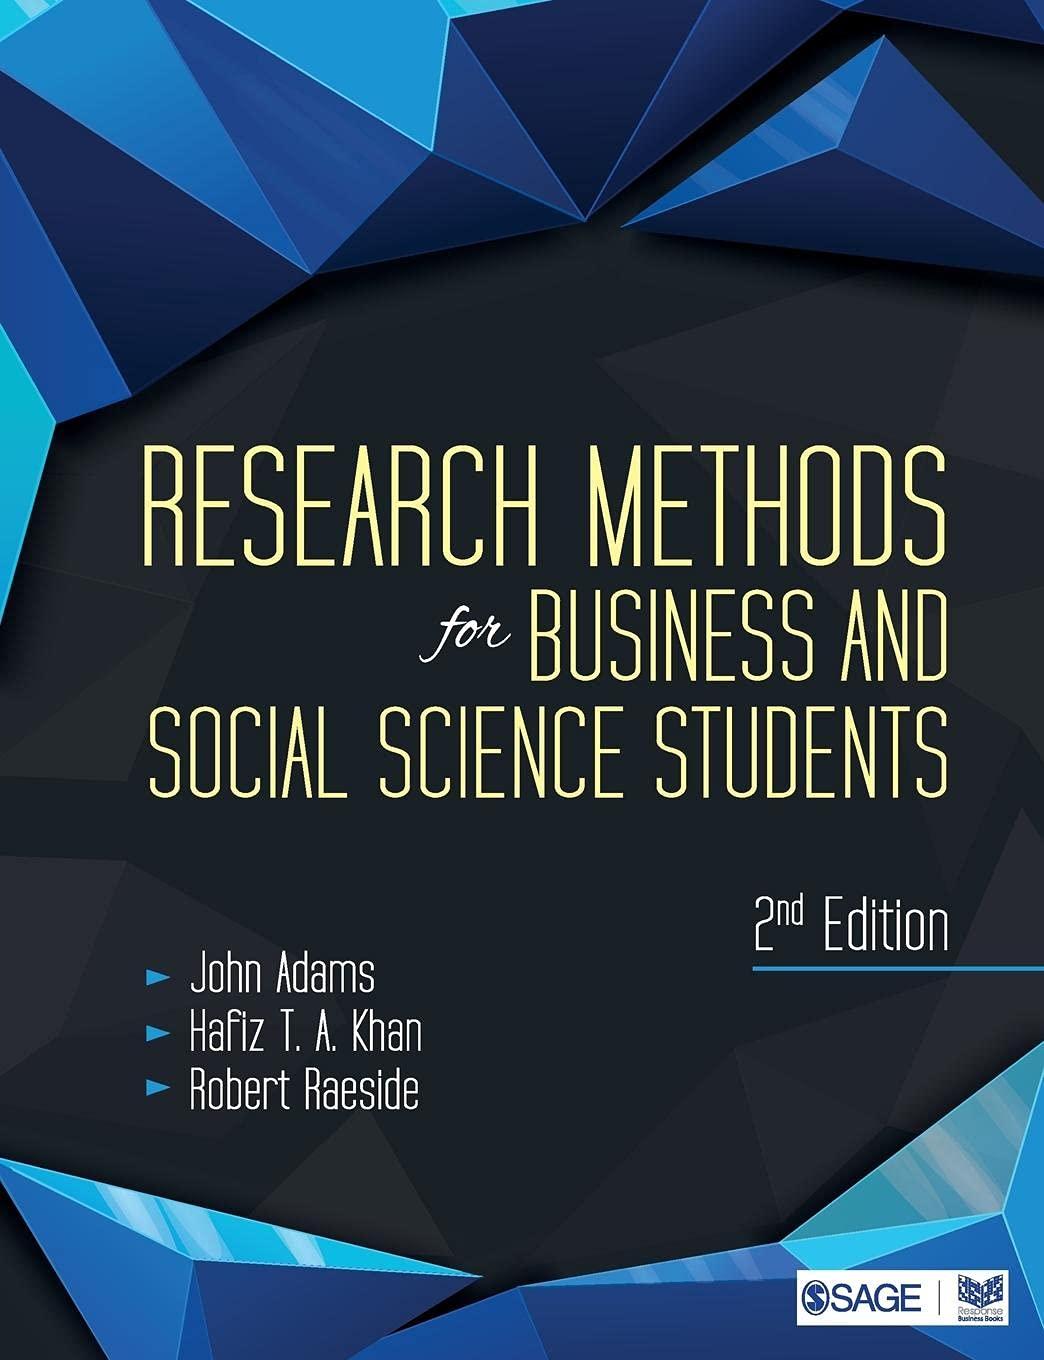 research methods for business and social science students 2nd edition john adams 8132113667, 9788132113669